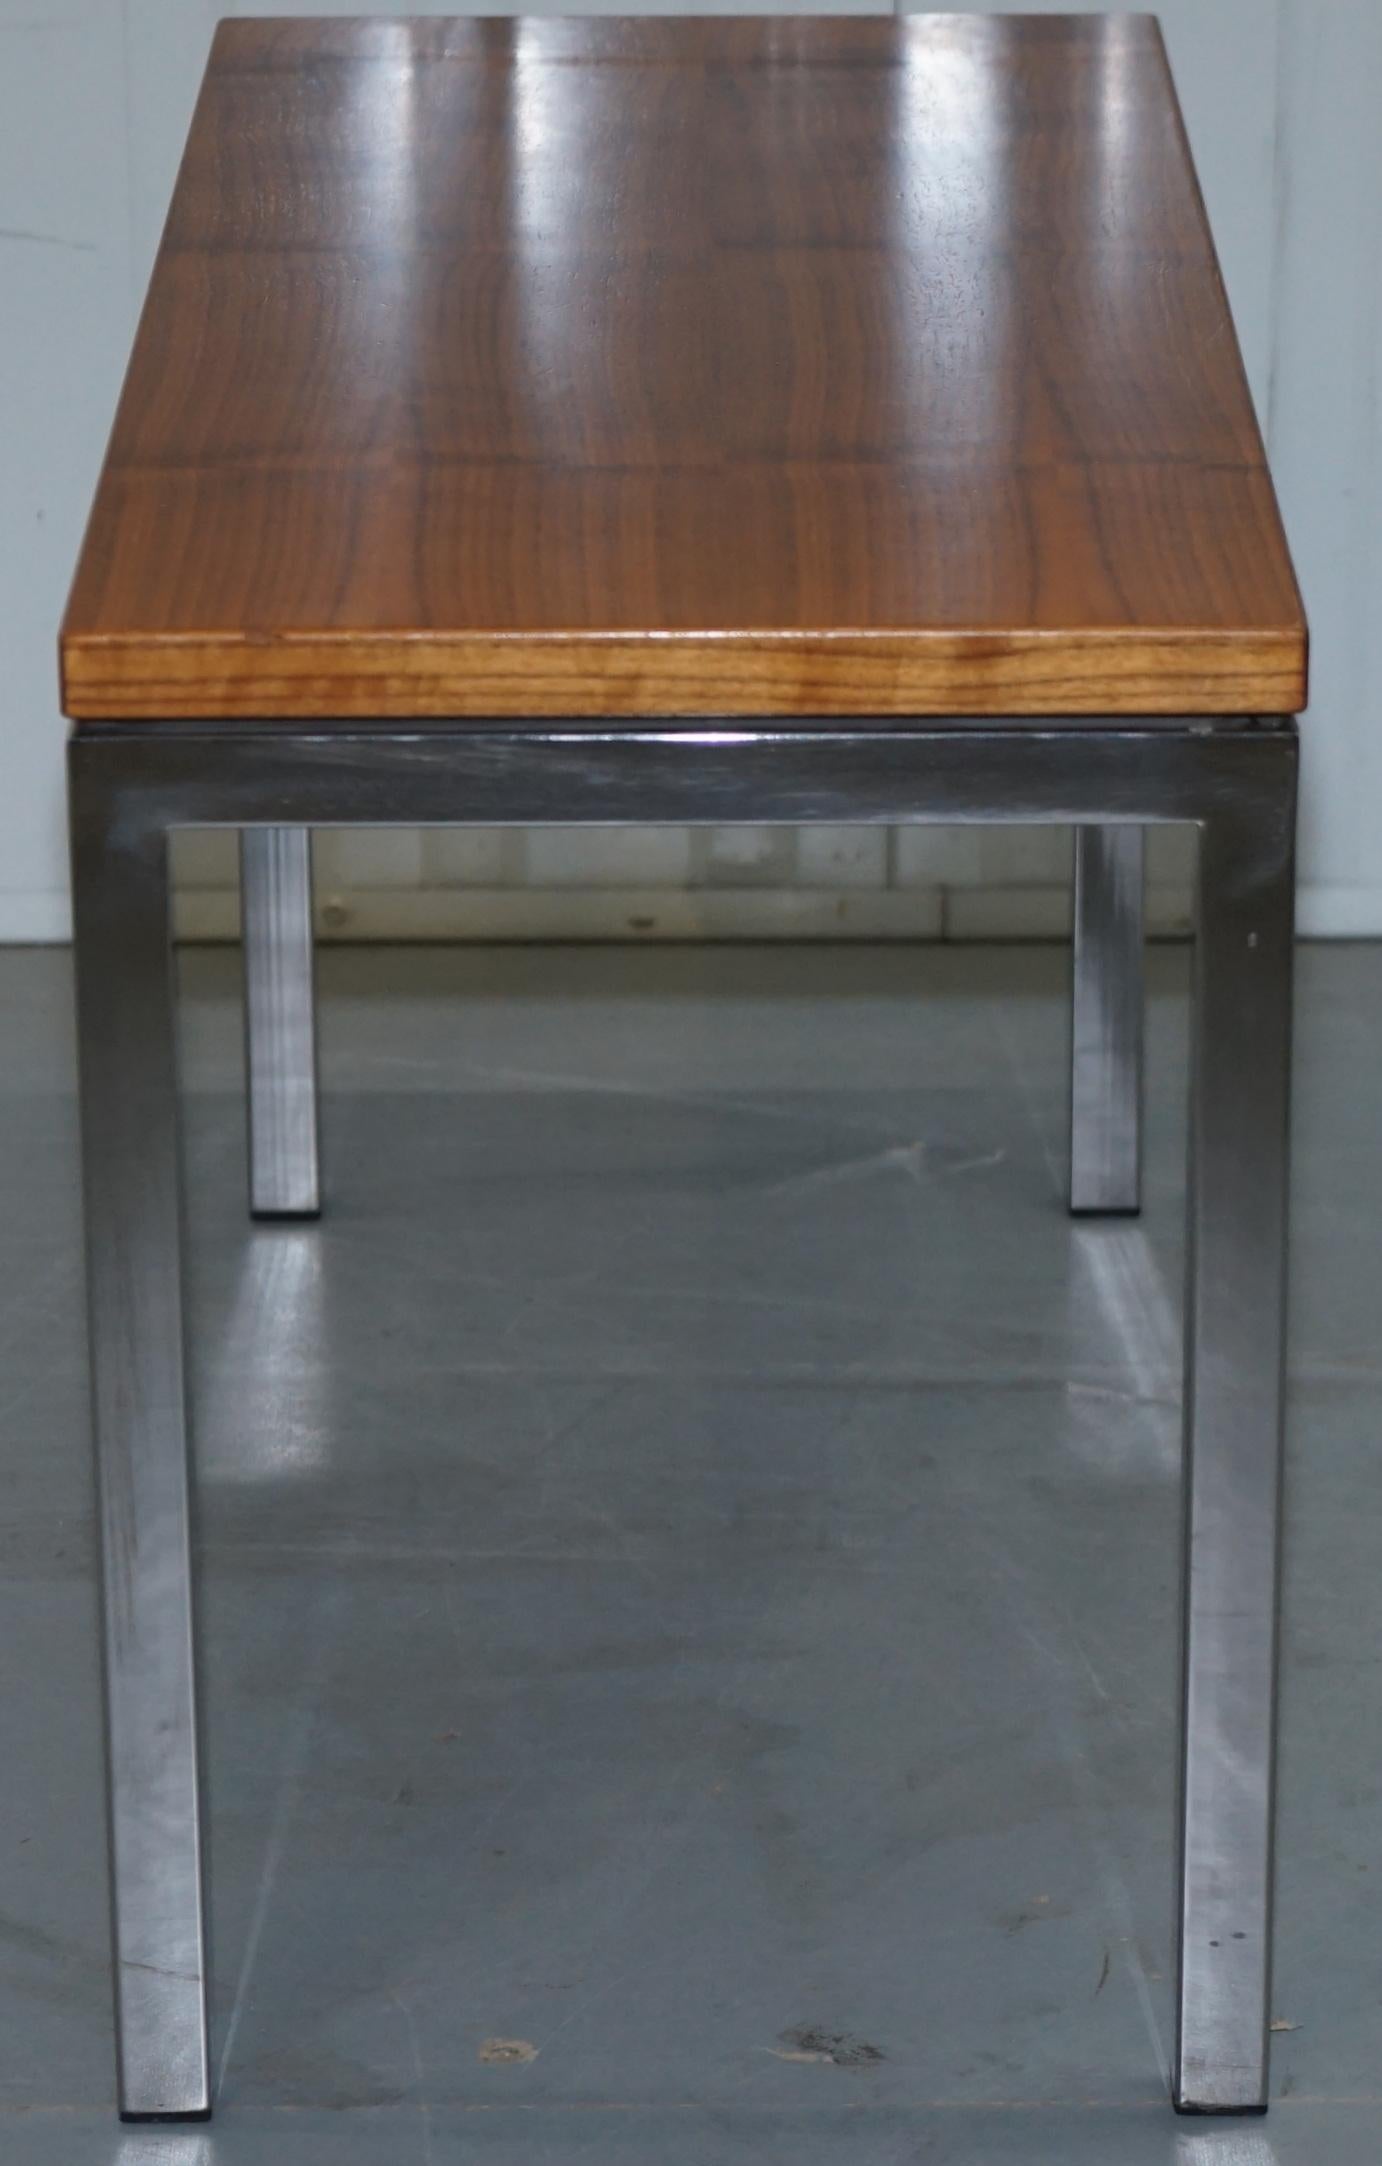 Stunning Teak and Chrome Contemporary Small Coffee Table Midcentury Styling For Sale 6